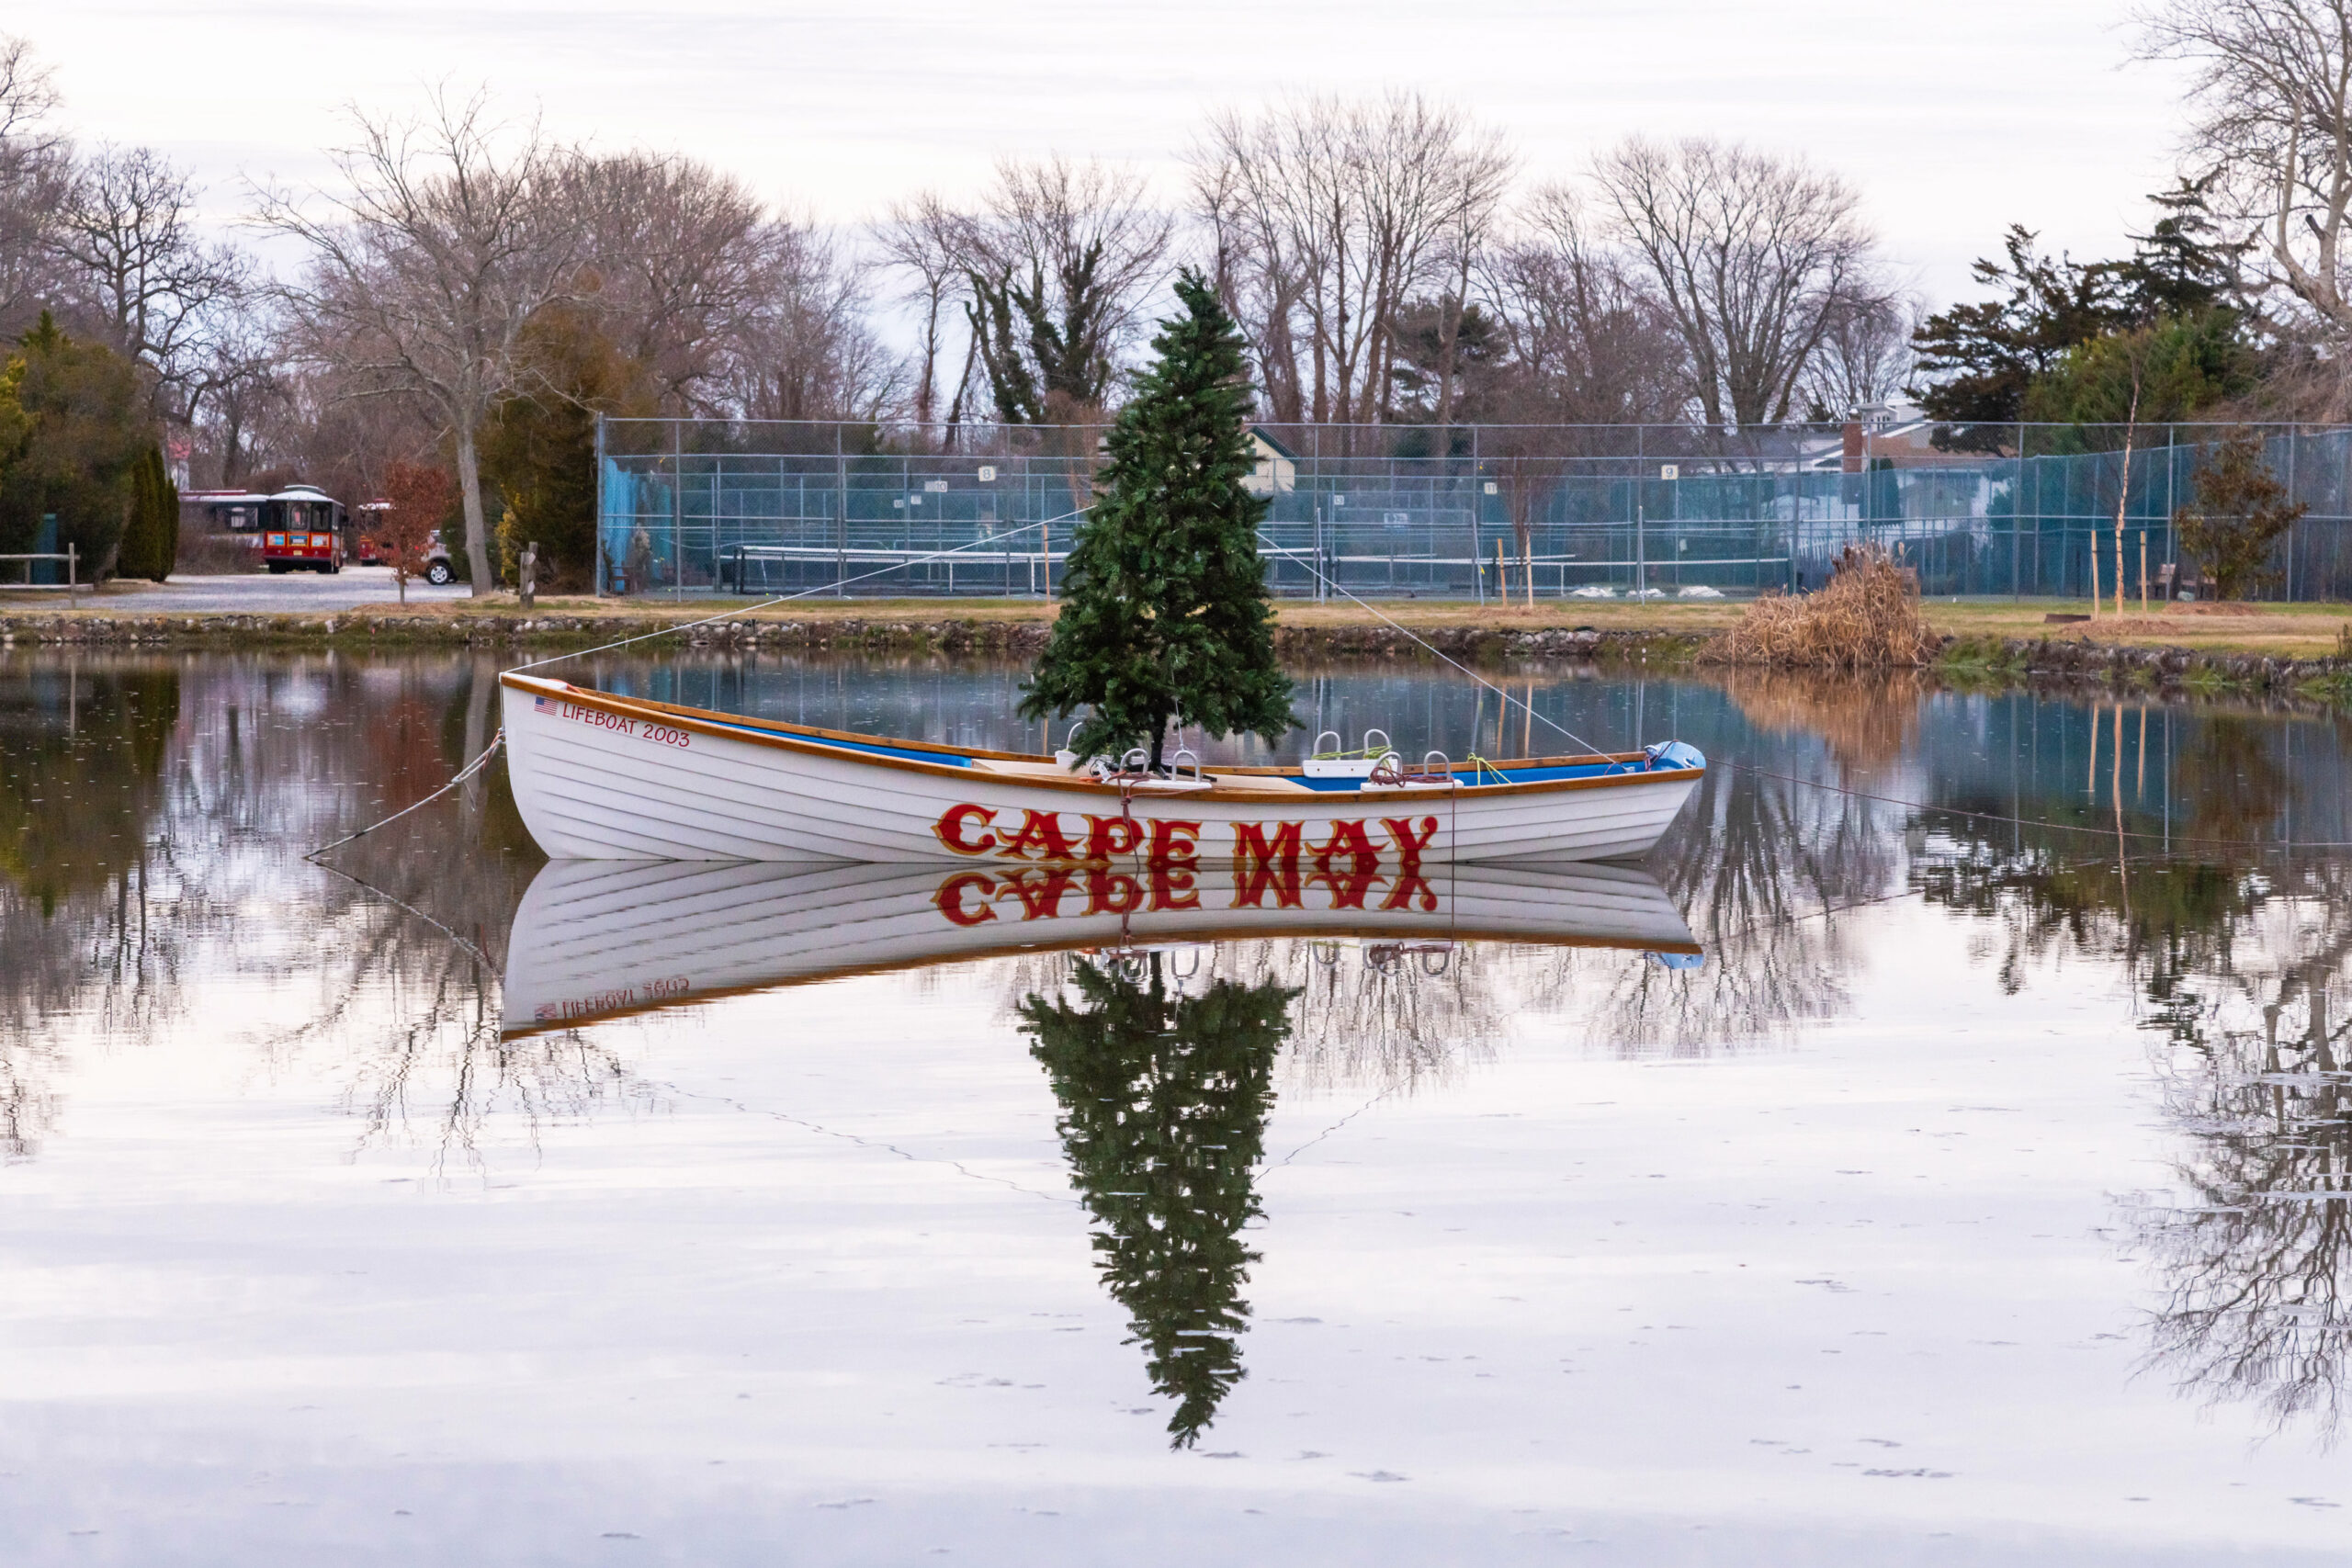 A Christmas tree in a Cape May lifeguard boat in the pond at the Kiwanis Community Park on a cloud day